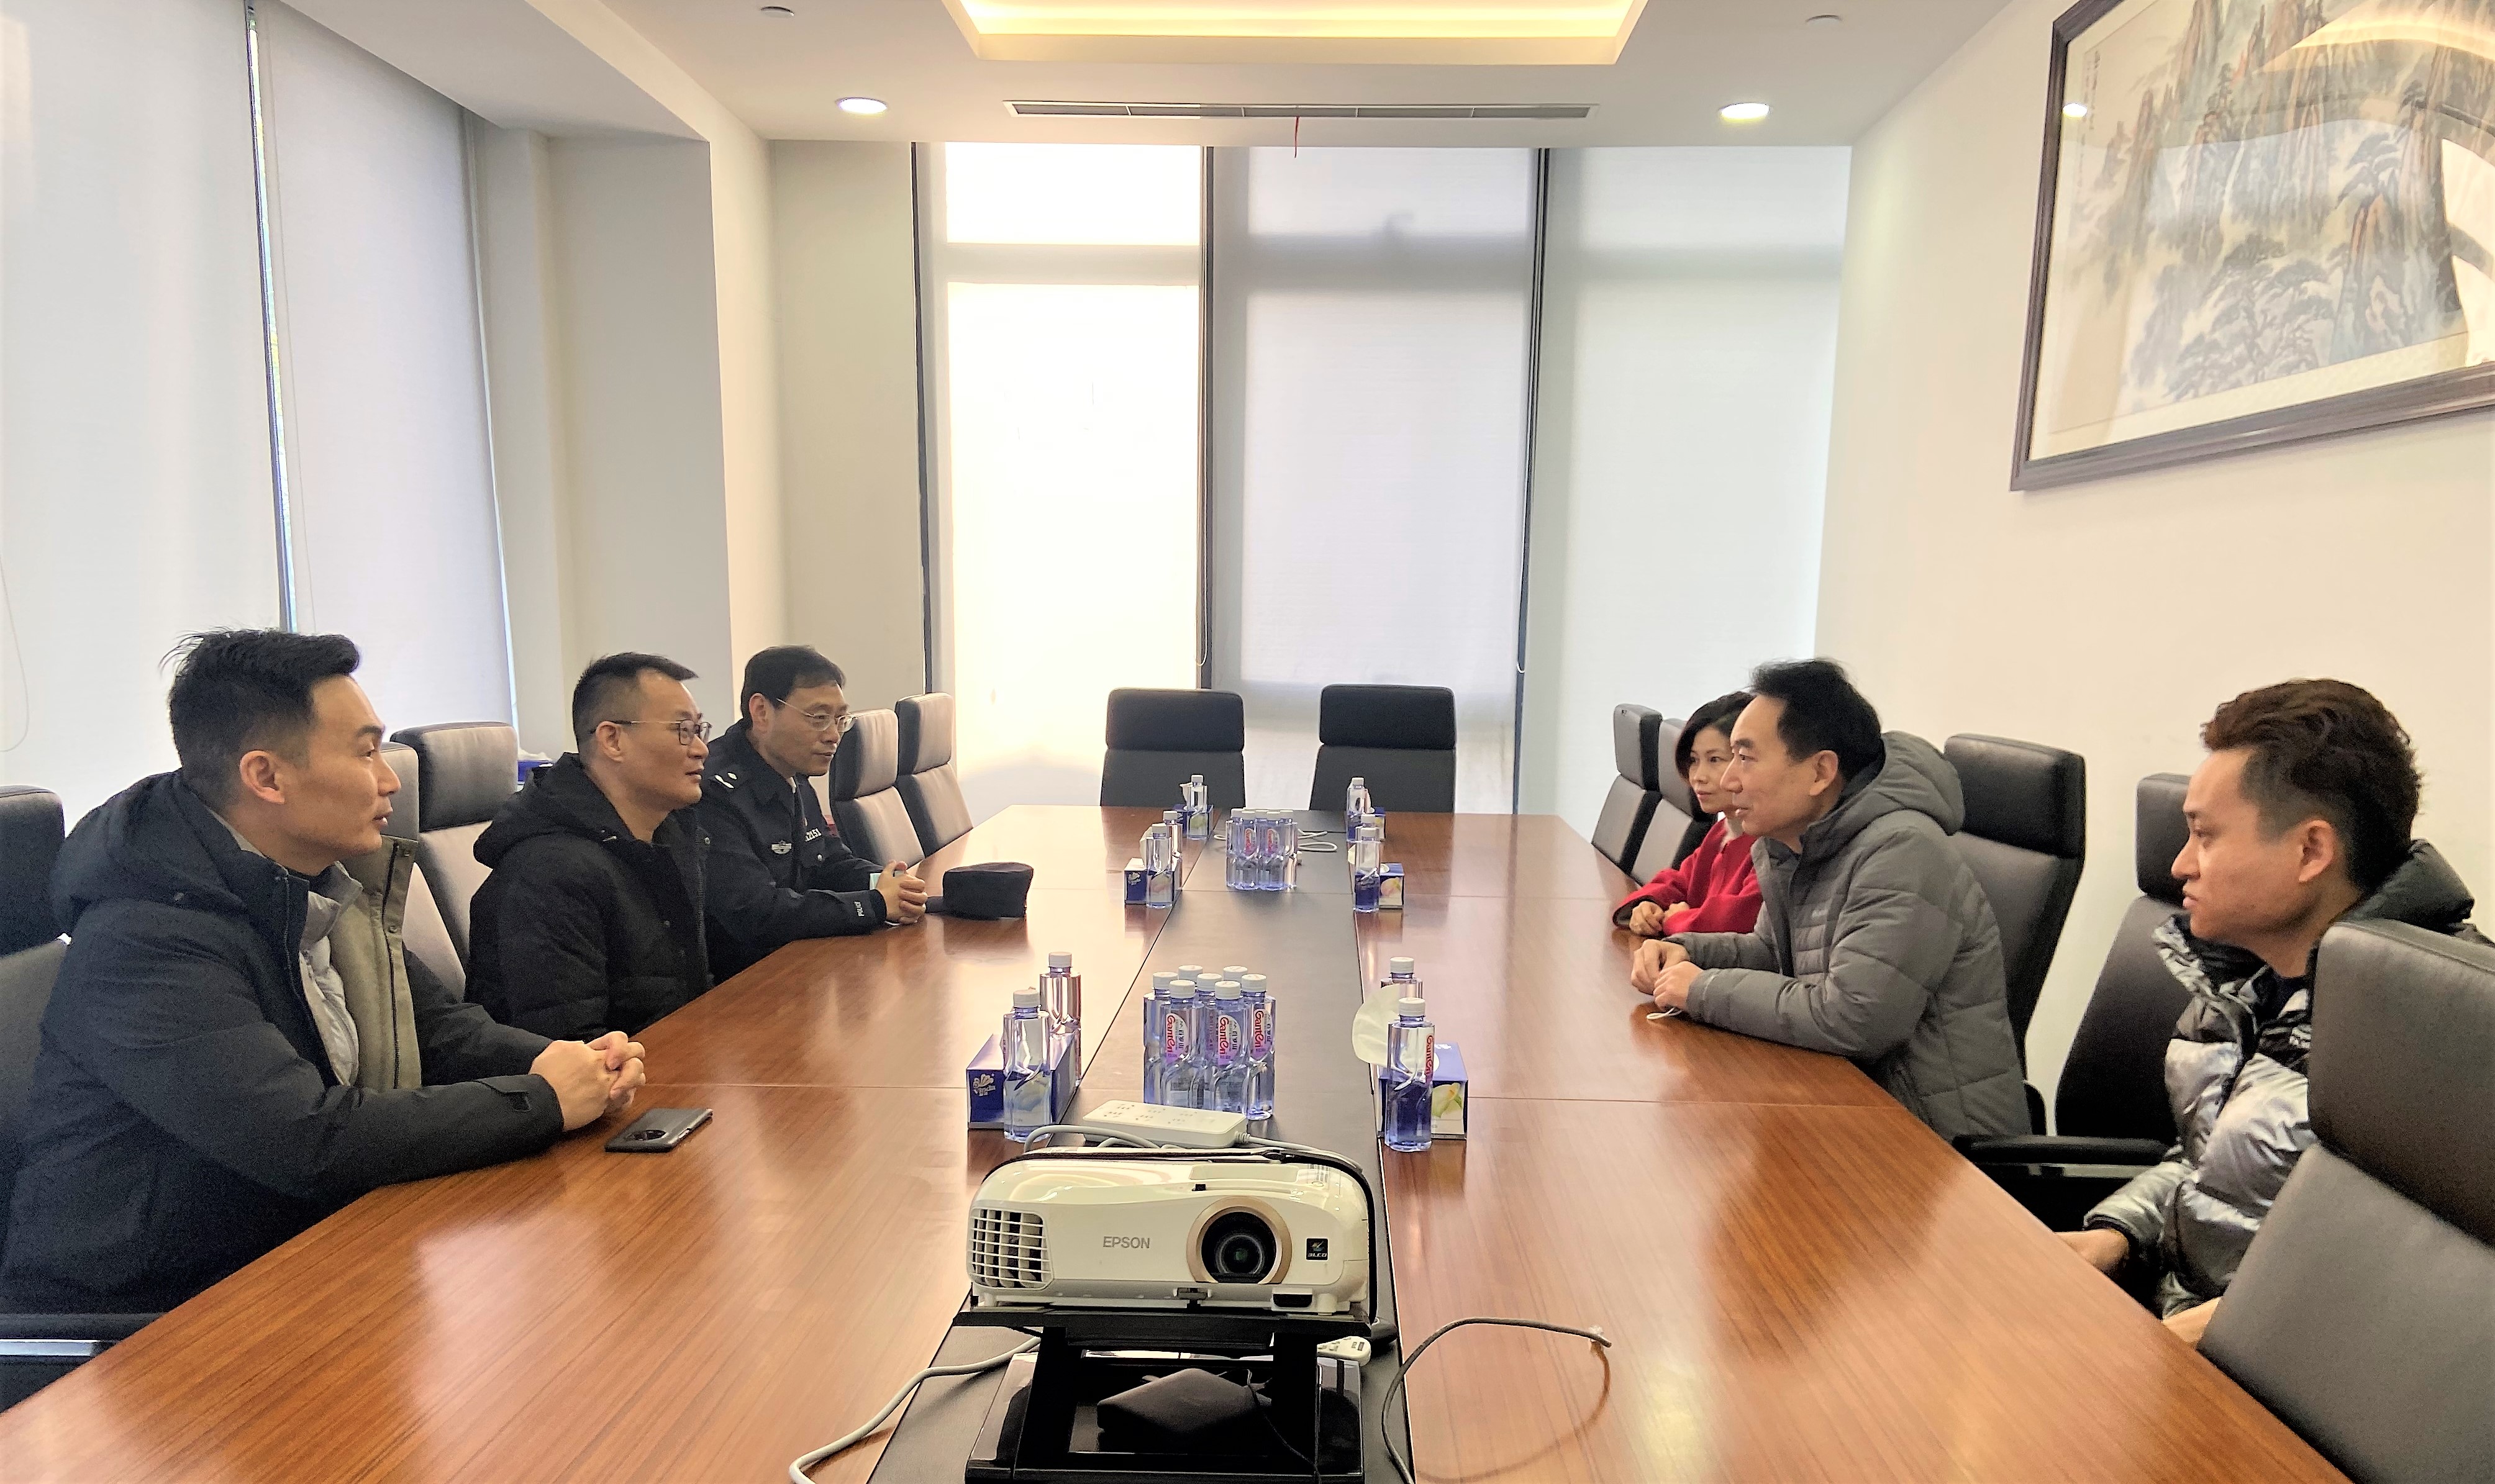 Yi Huang led the team to visit Xihua before the Spring Festival